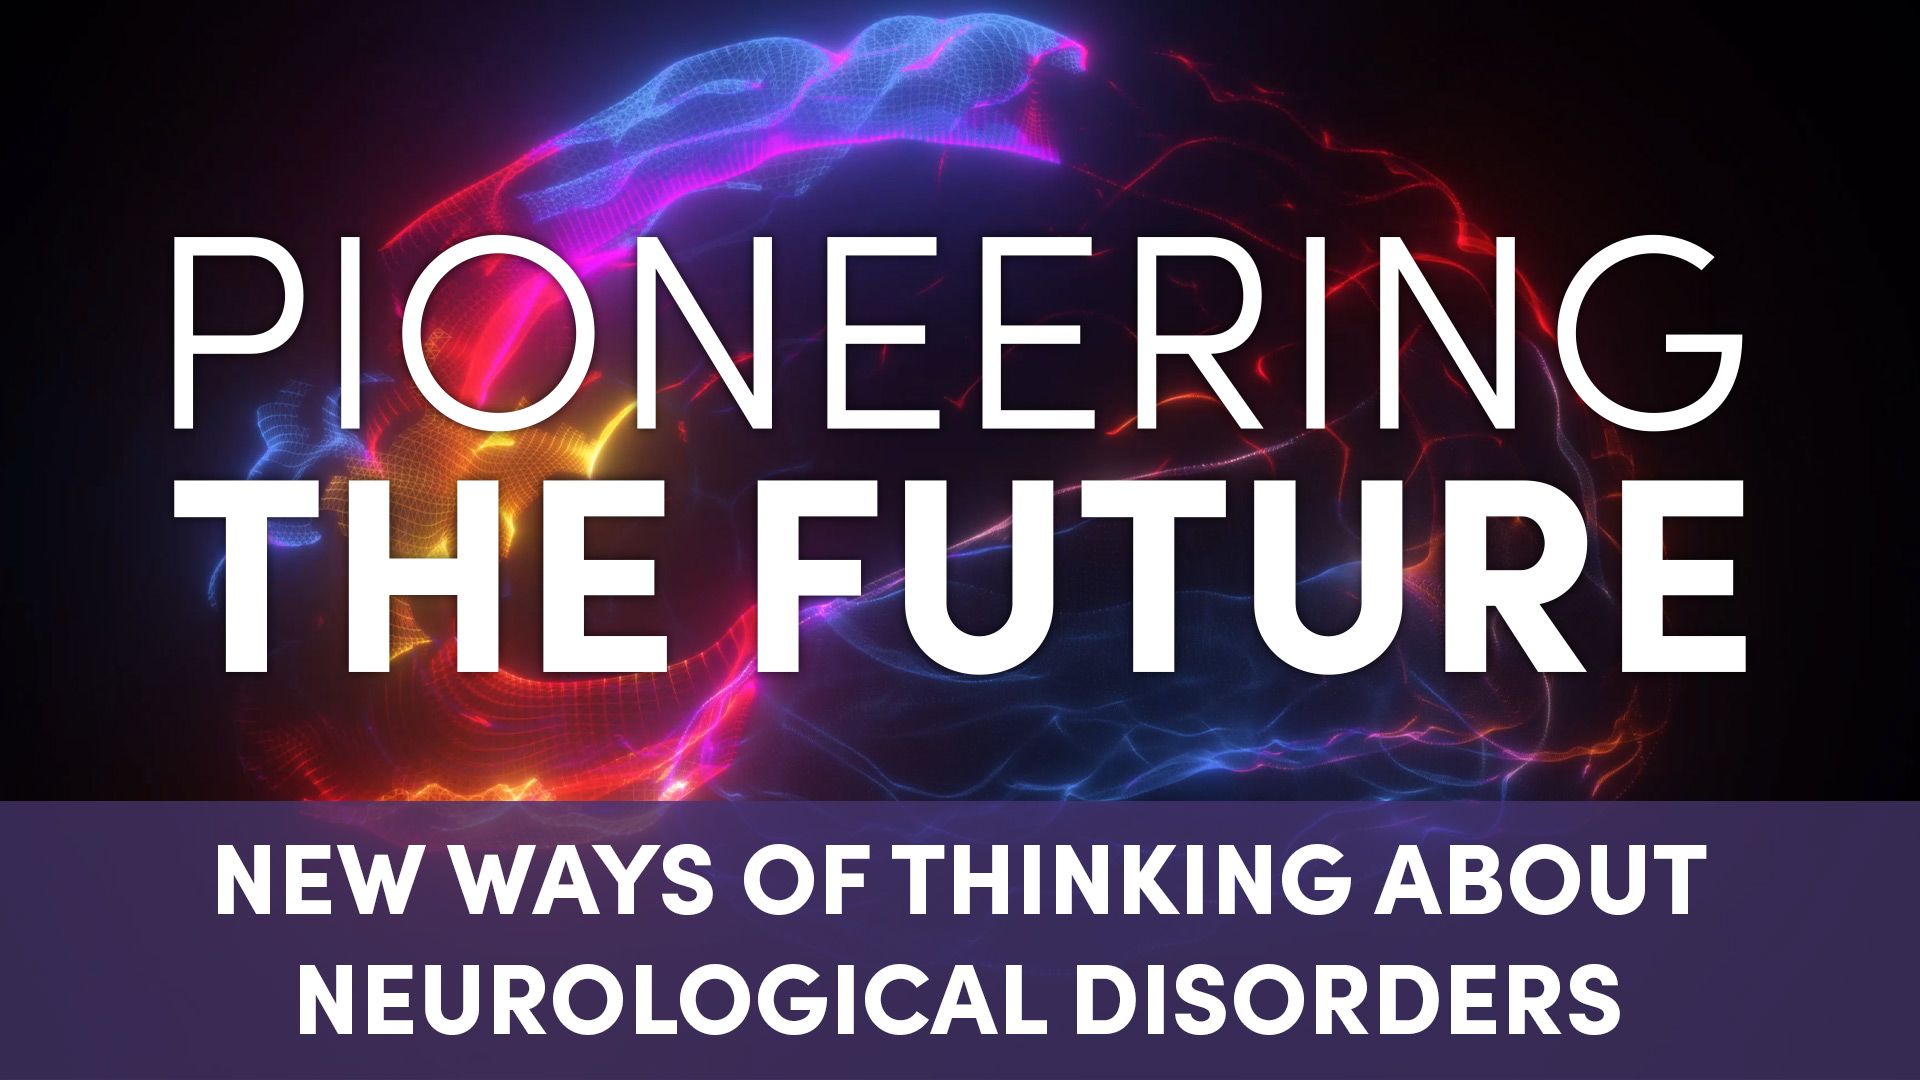 Pioneering the Future New Ways of Thinking About Neurological Disorders